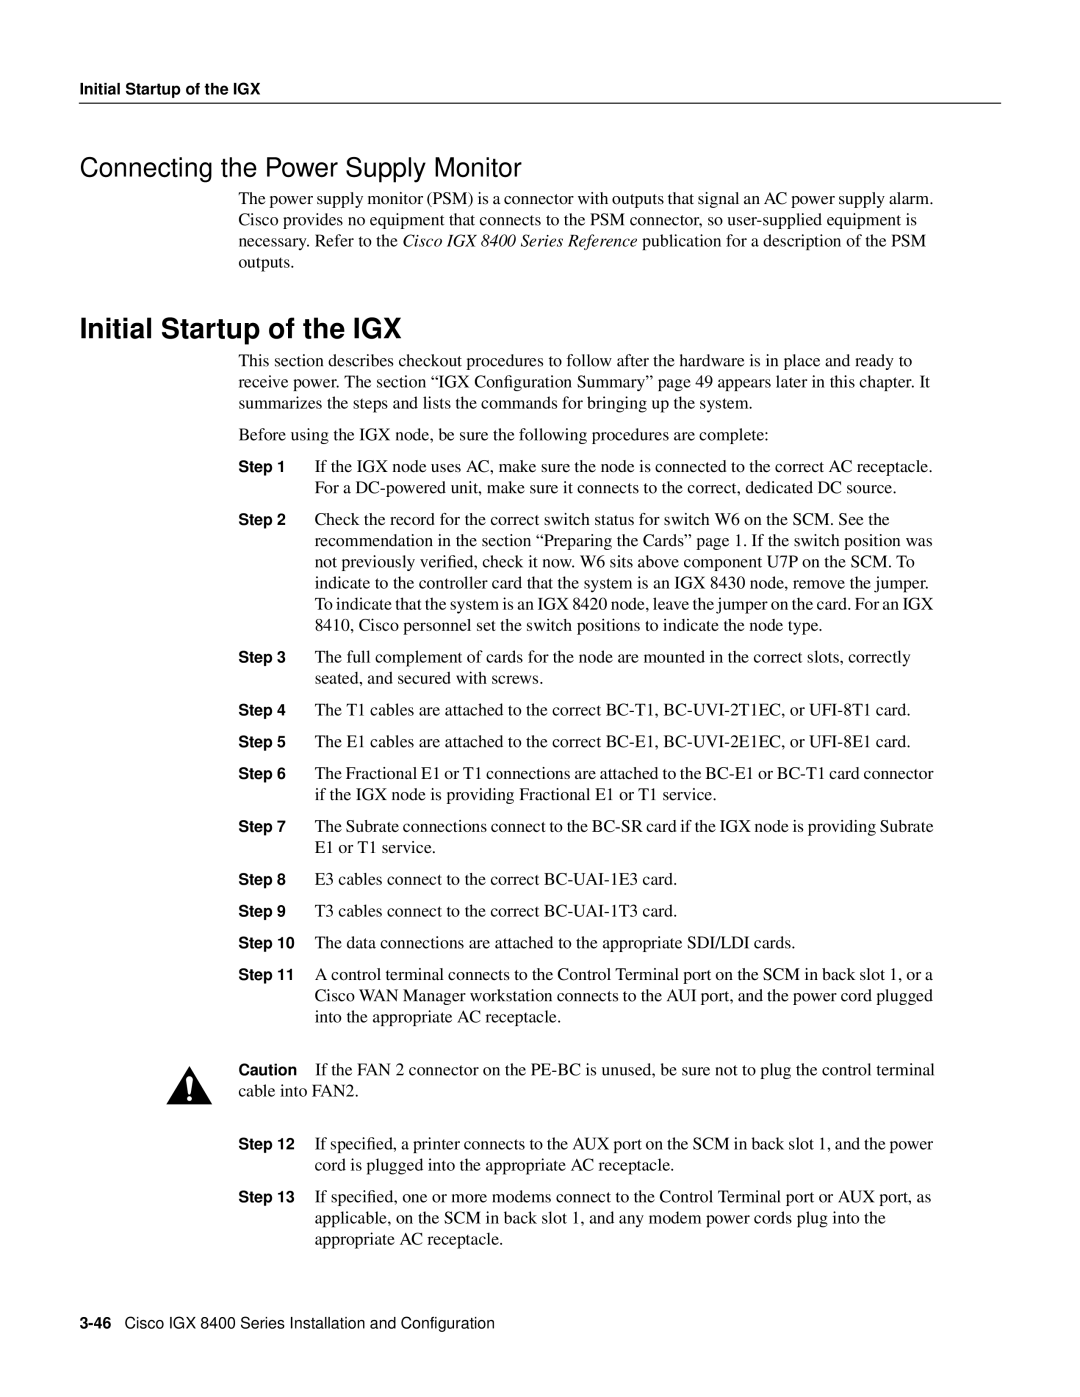 Cisco Systems IGX 8400 Series manual Initial Startup of the IGX, Connecting the Power Supply Monitor 